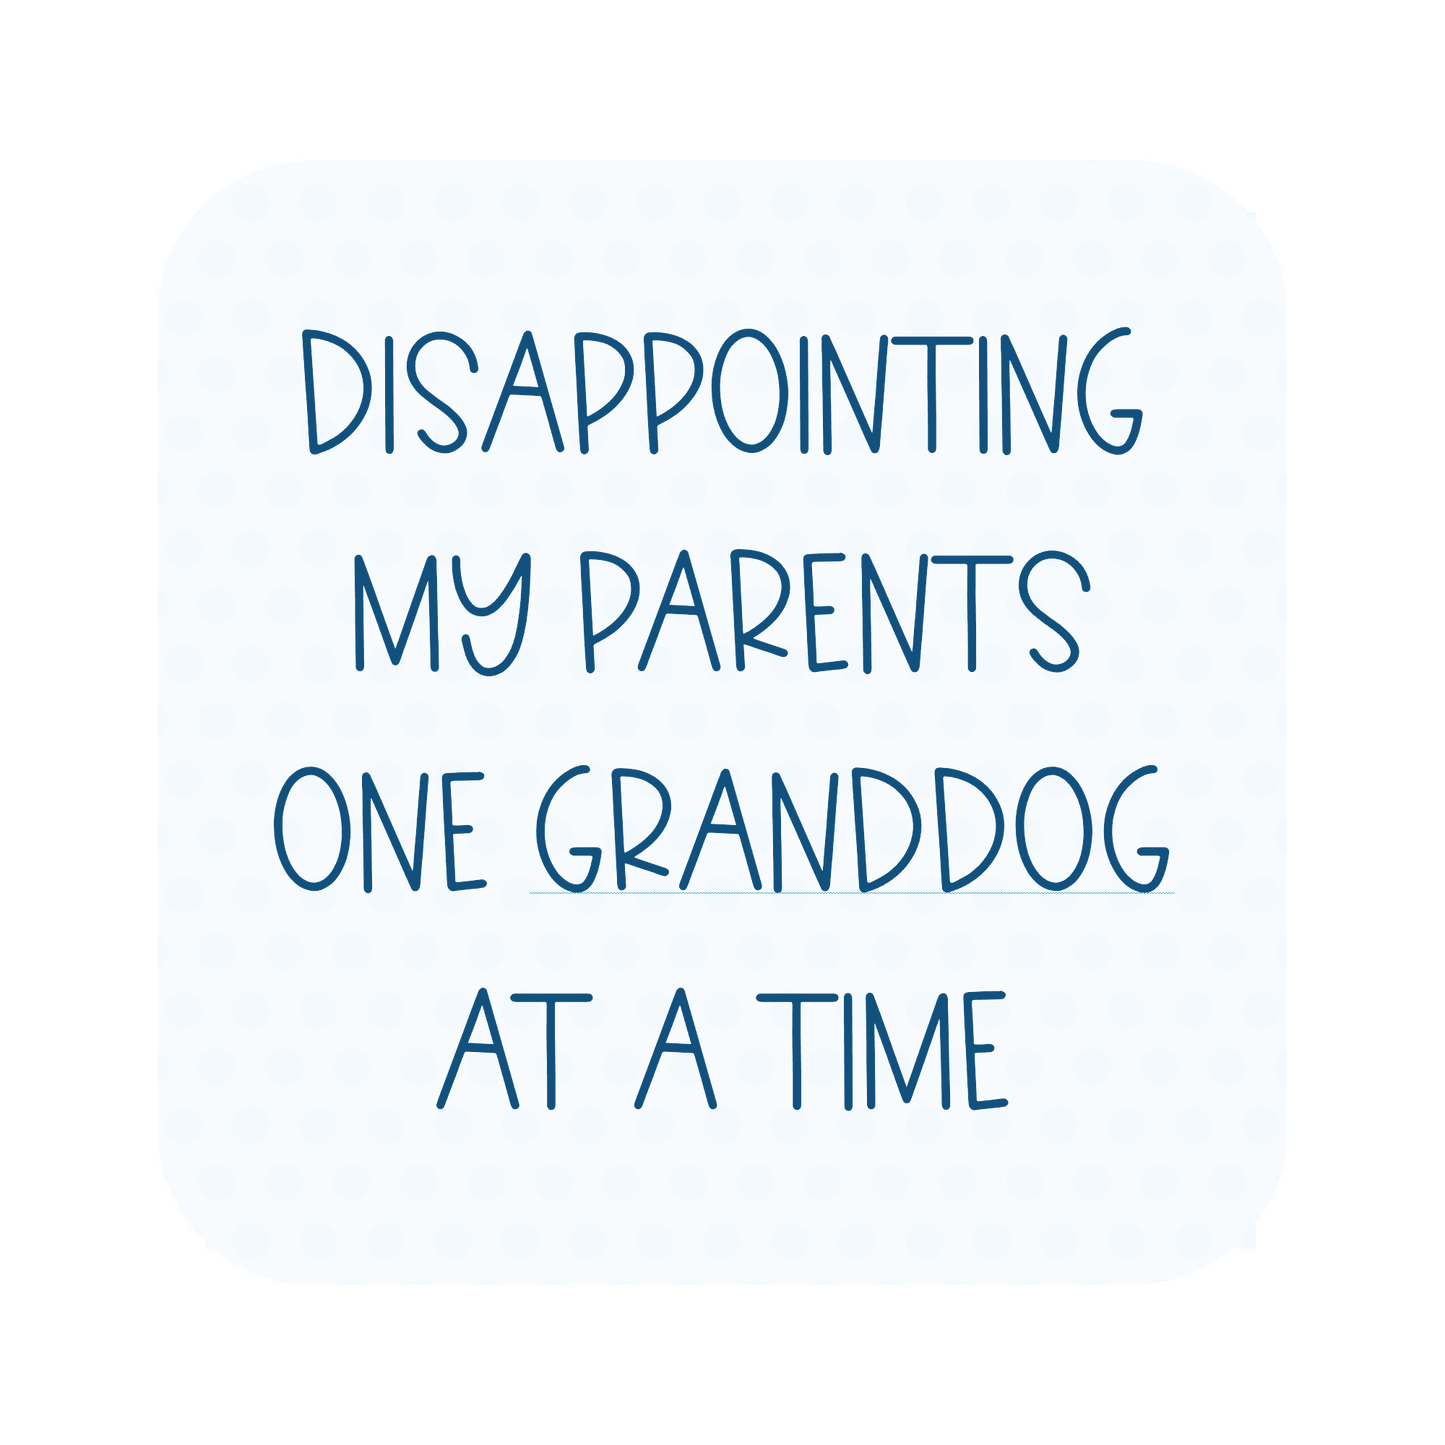 Disappointing My Parents One Granddog At A Time Fridge Magnet